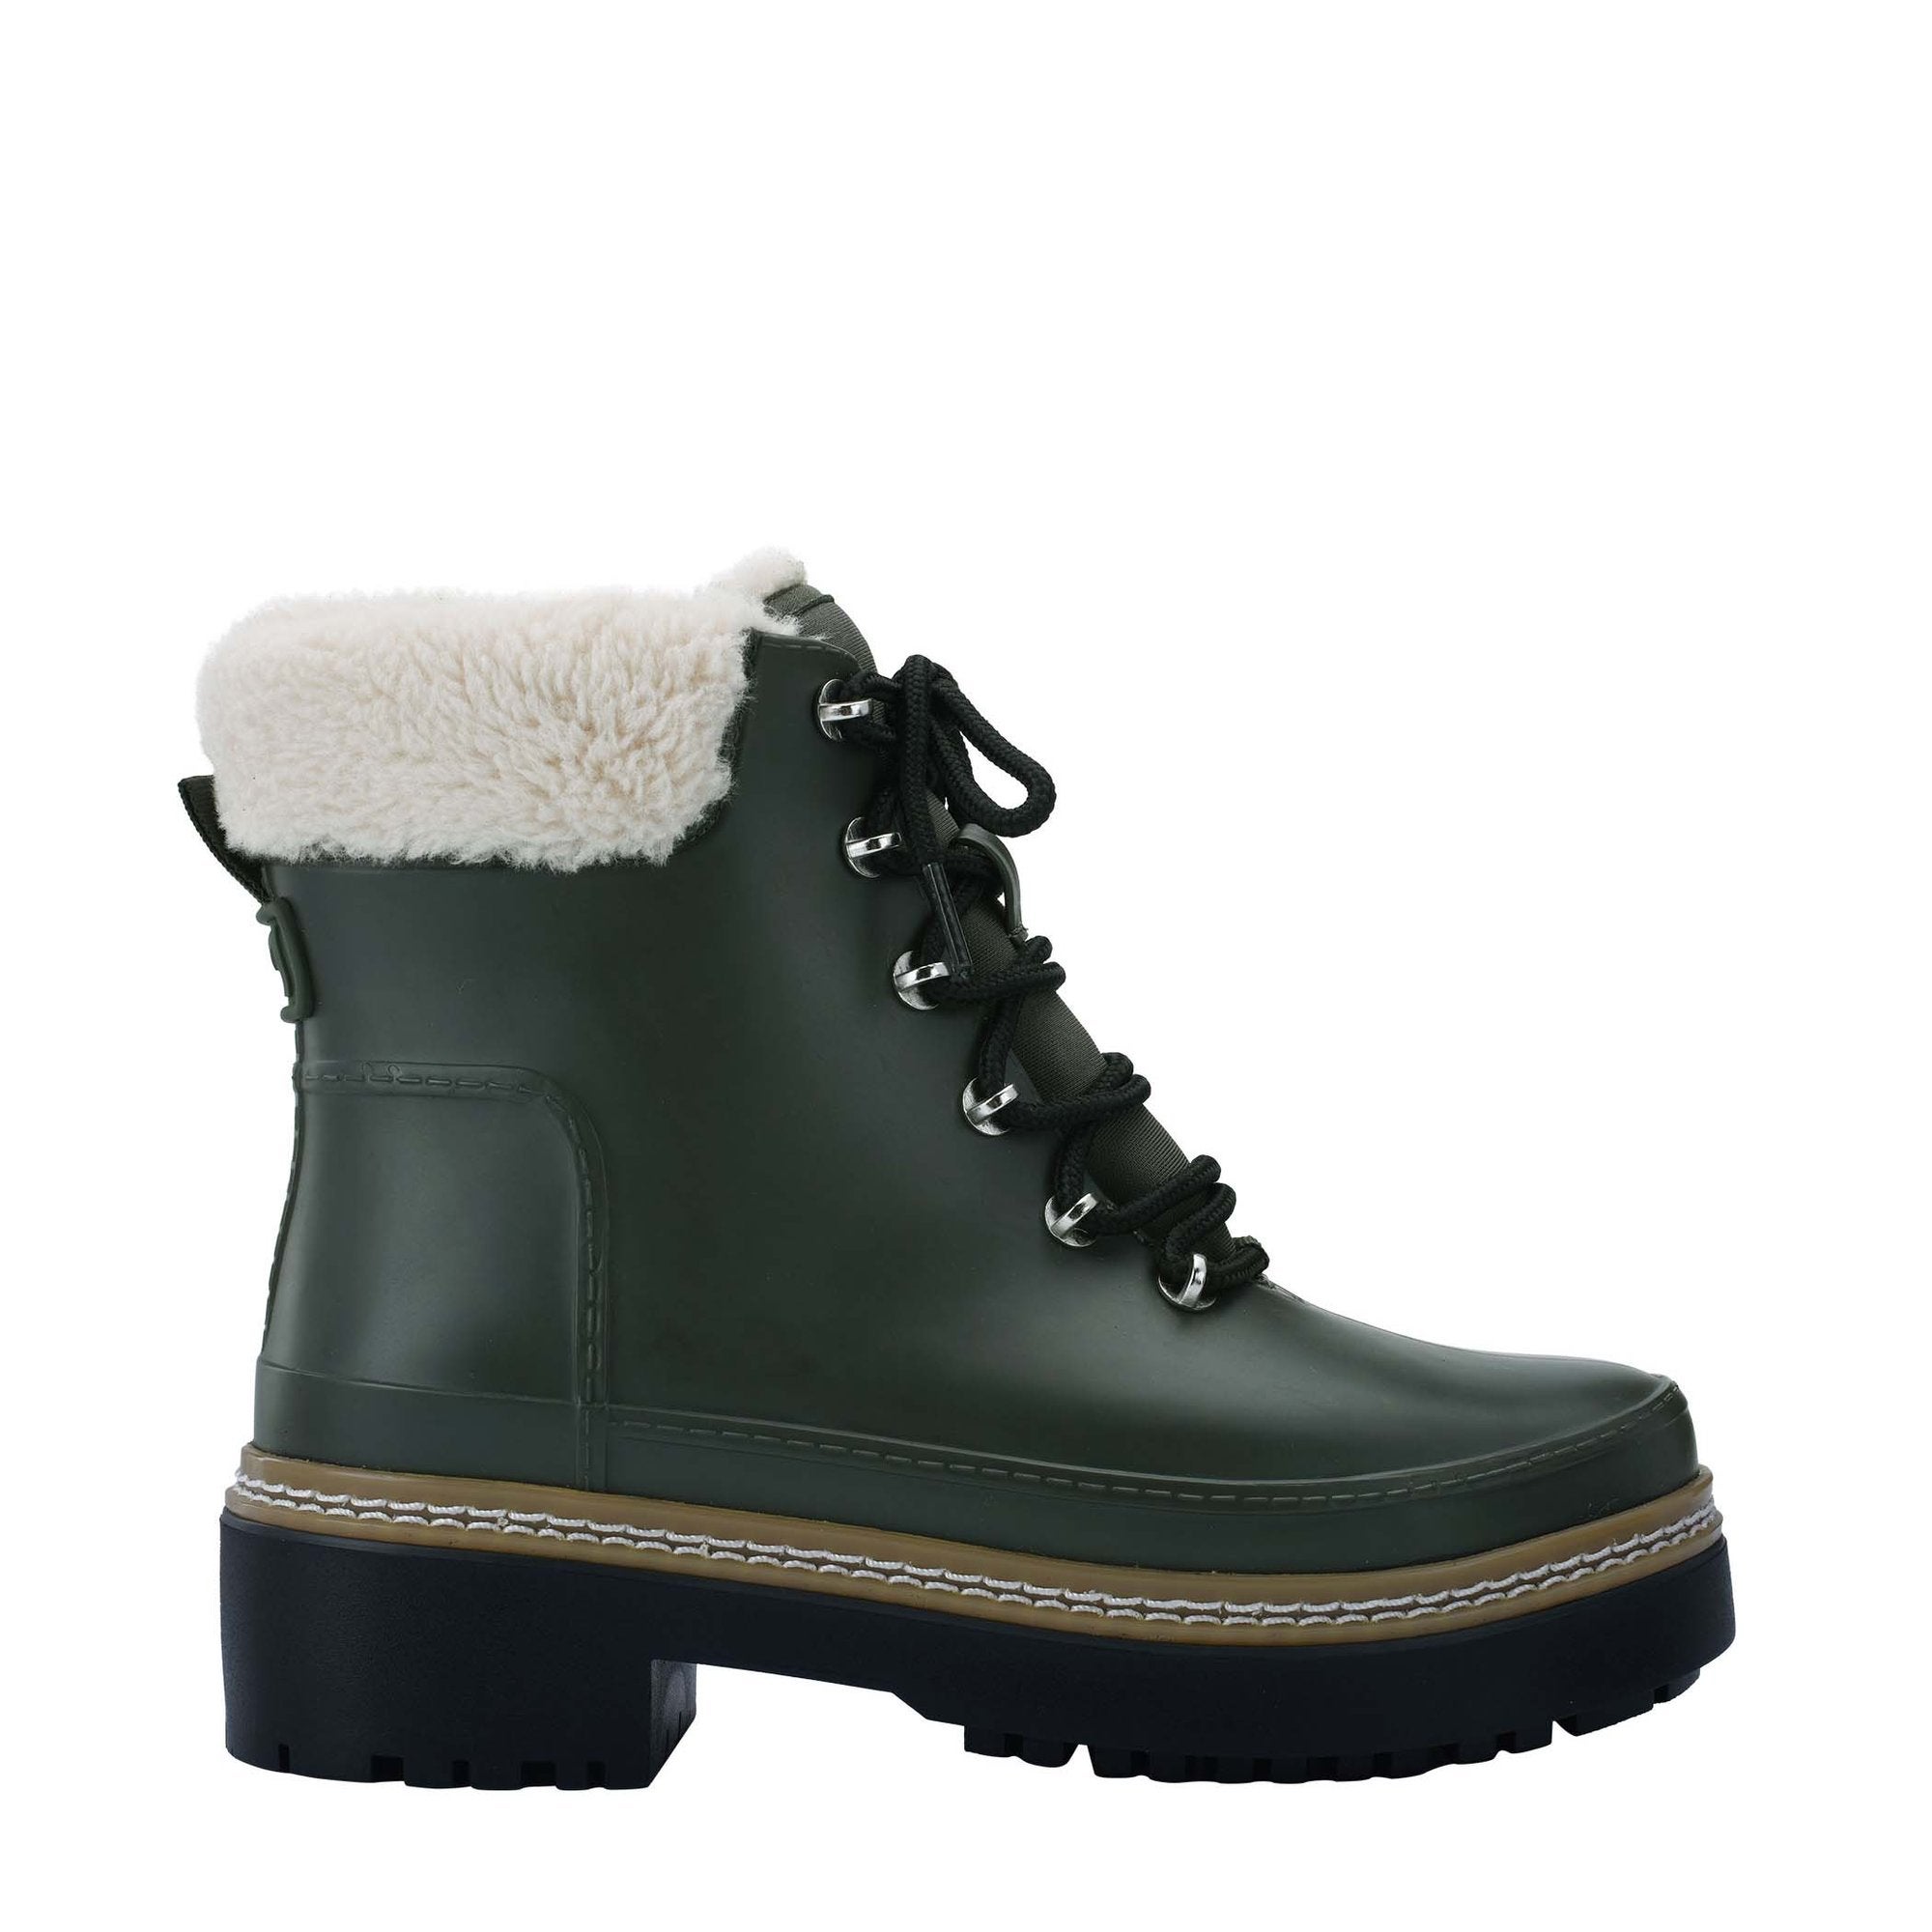 20% Off Marc Fisher Boots Refinery29 Promo Code